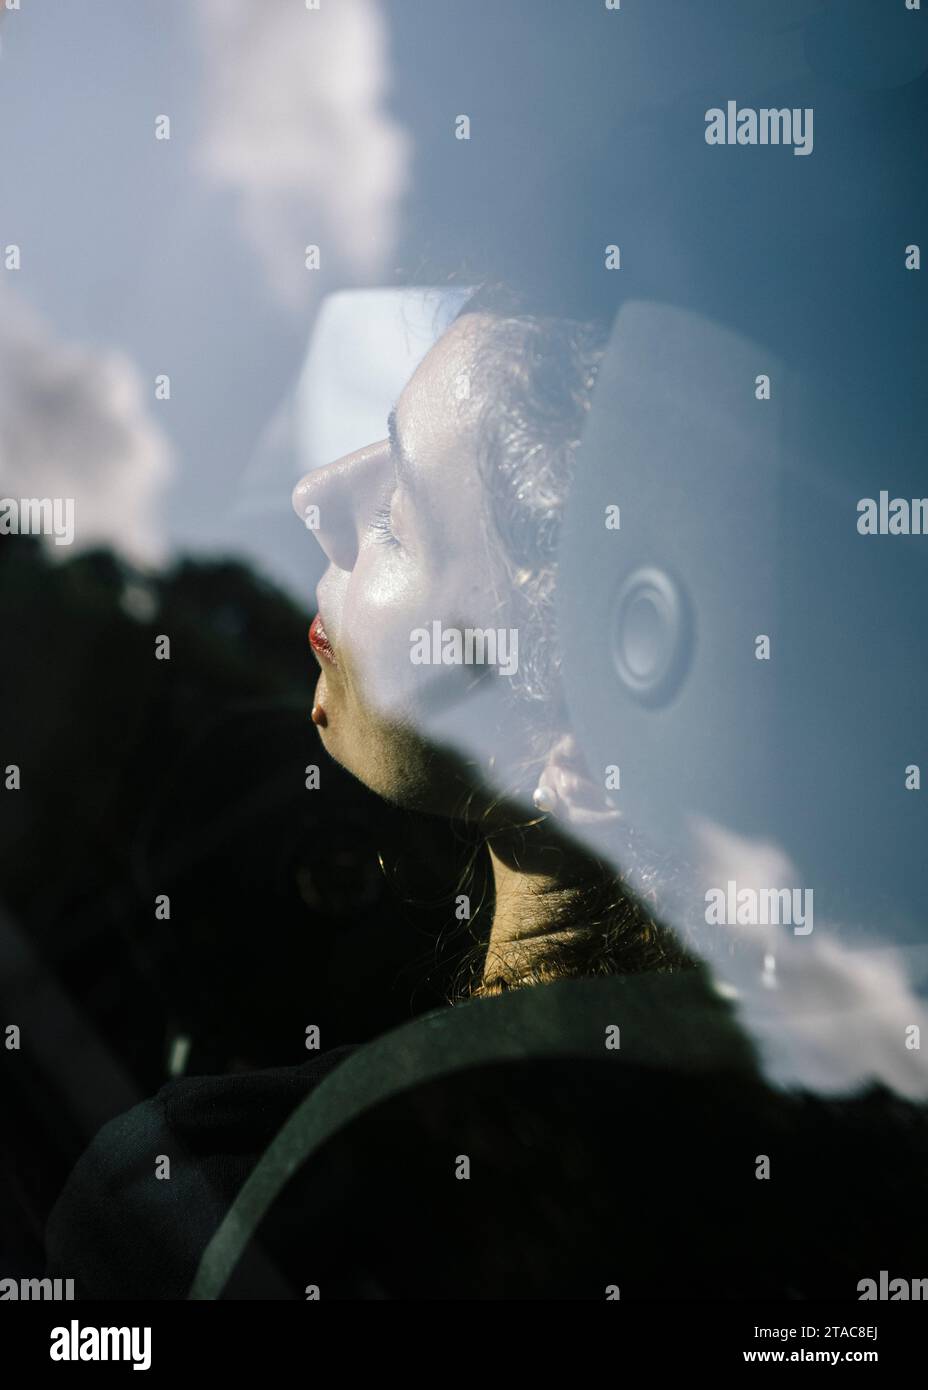 40-year-old woman sitting in the car. Close-up of her face and the reflection of the sky. Stock Photo